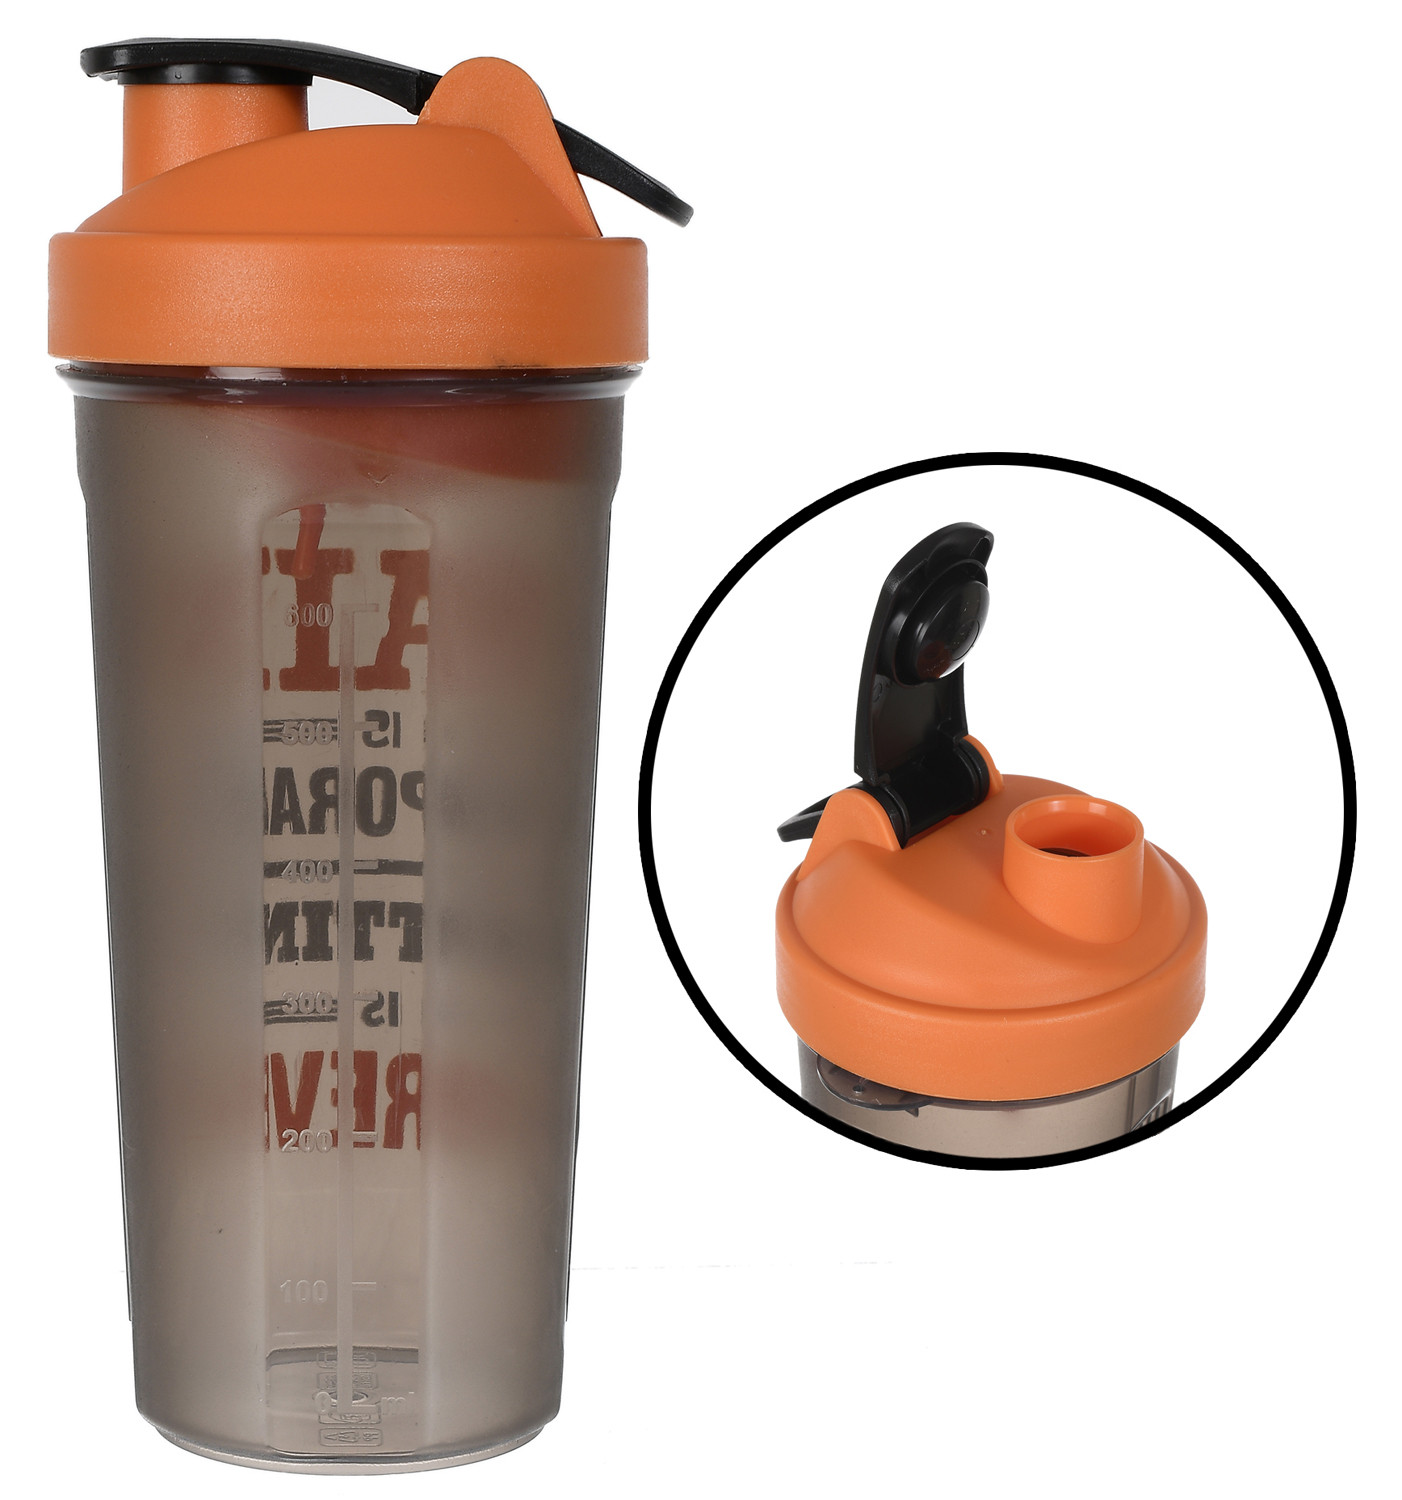 Kuber Industries Protein Shaker - 800 ml for Whey Proteins, and Preworkouts, 100% Leak Proof (Orange)